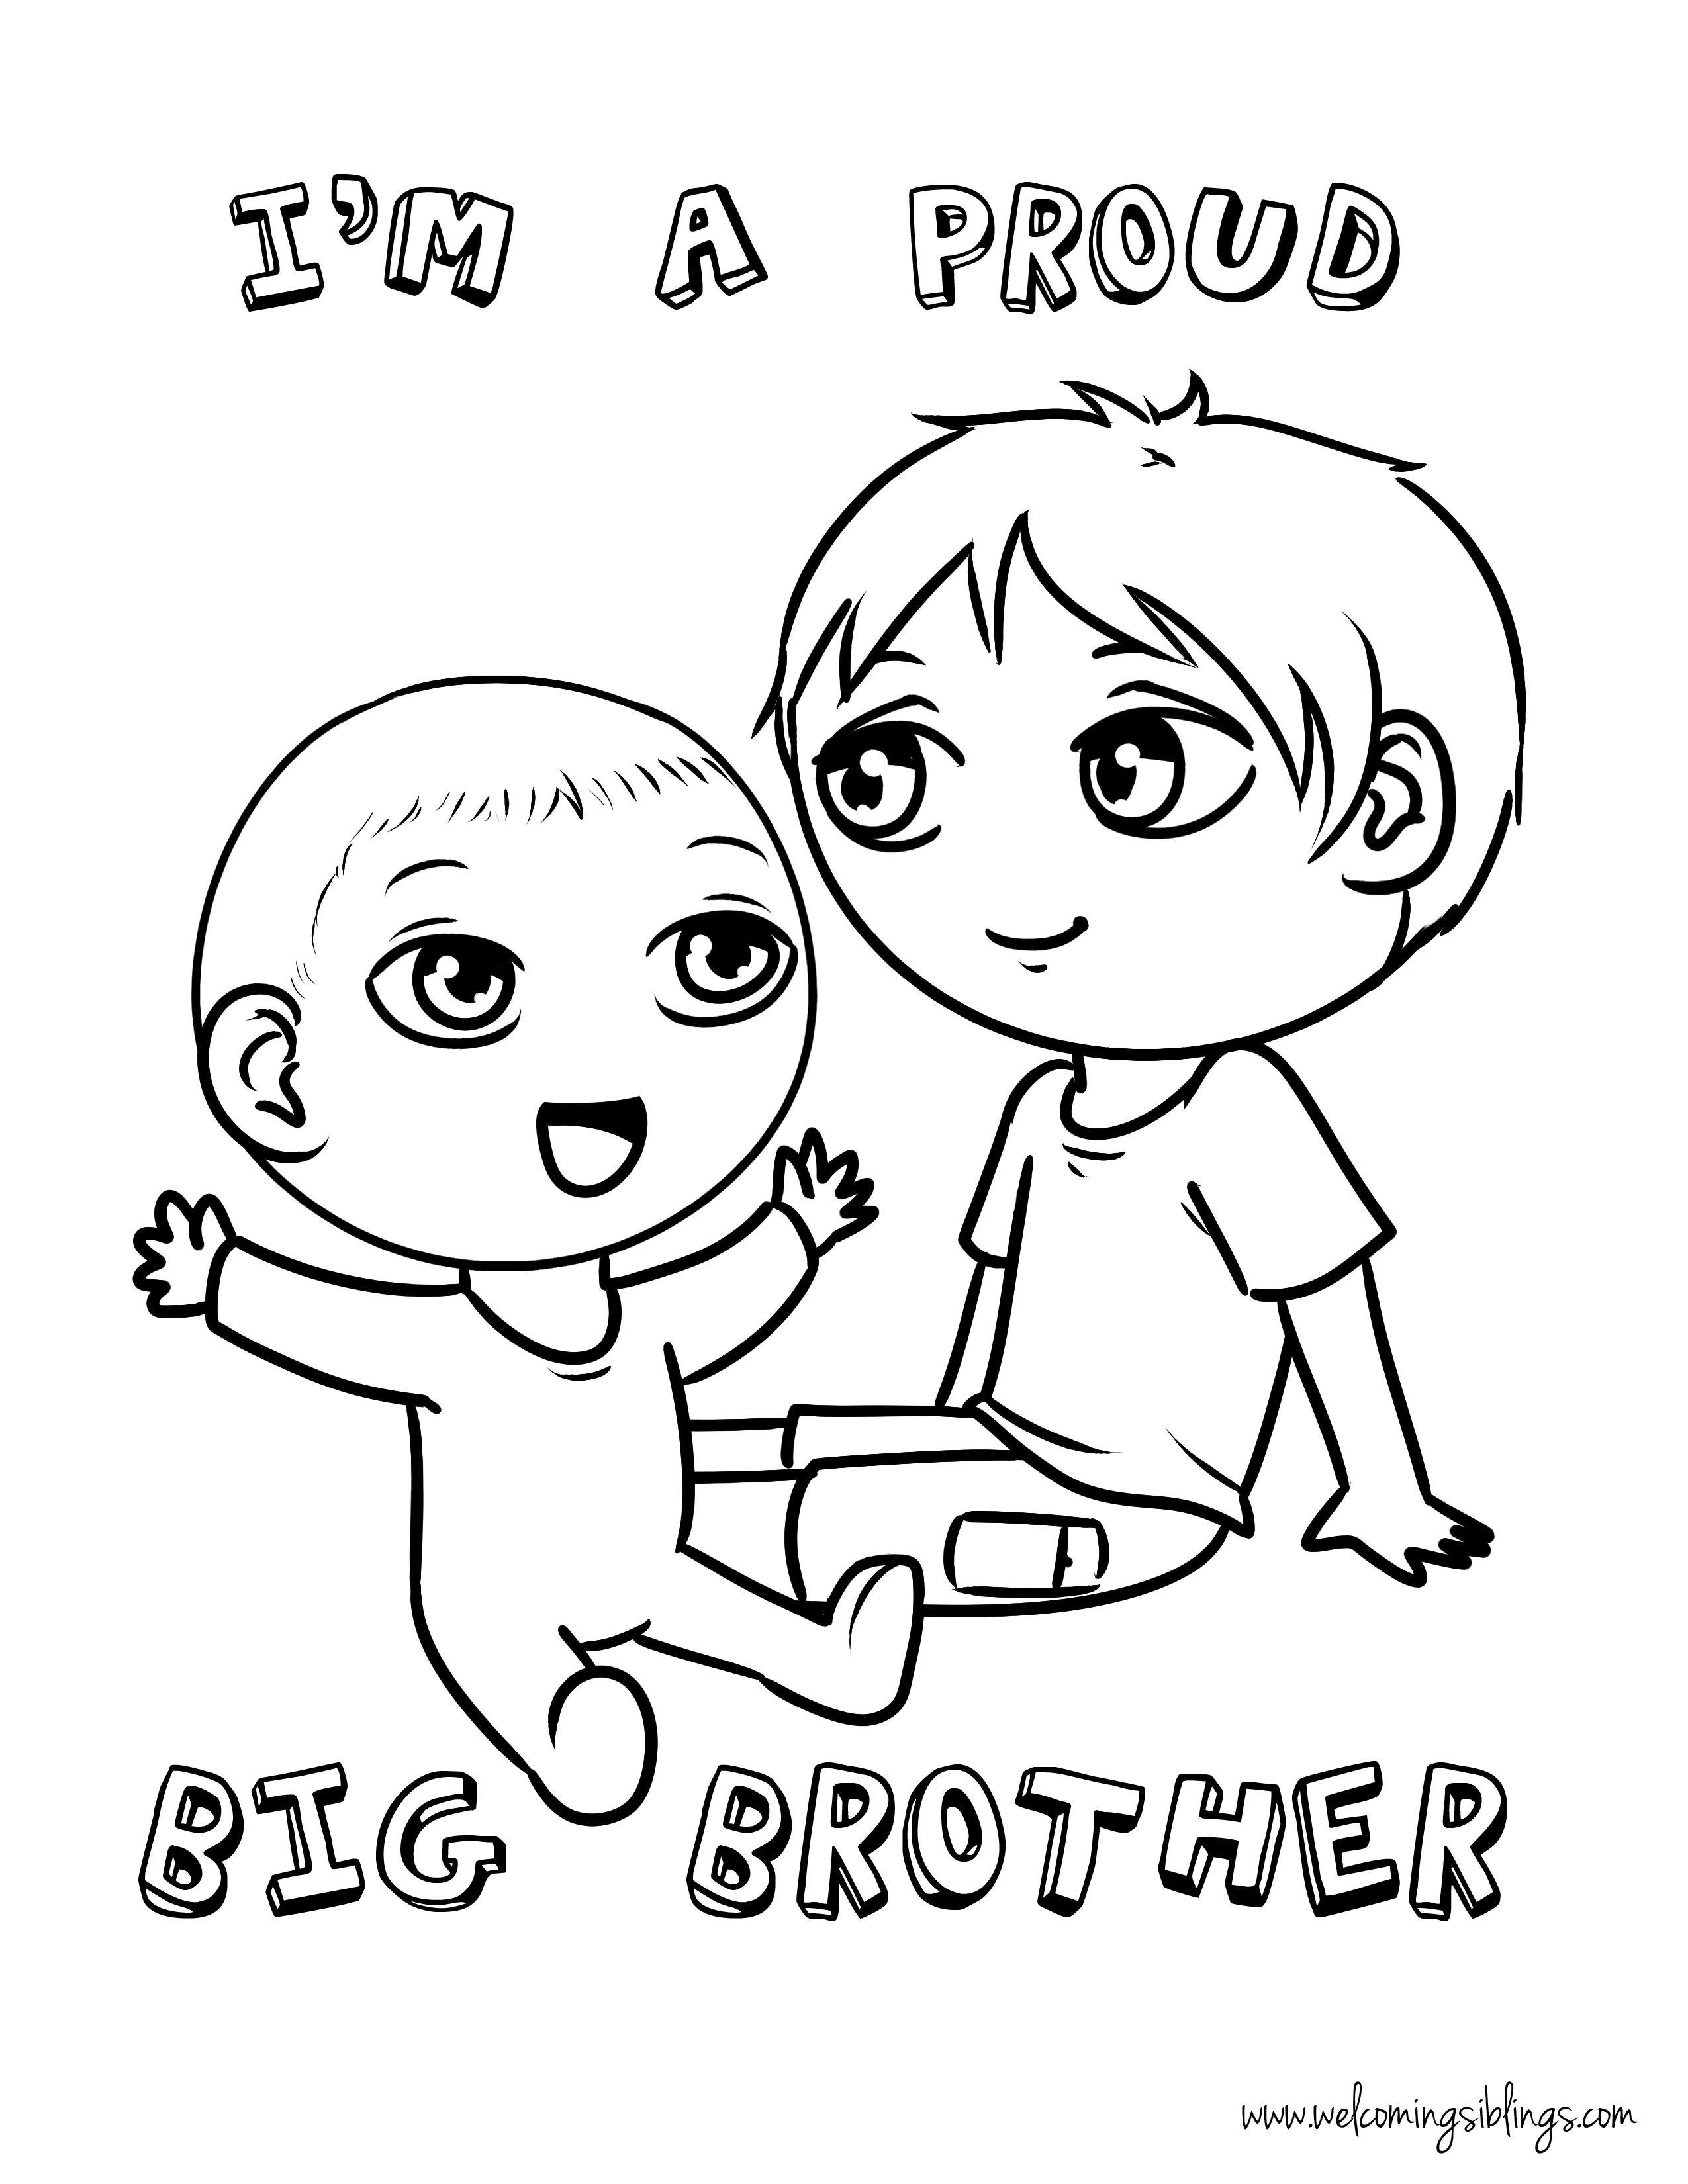 Free Big Brother Coloring Page Welcoming Siblings